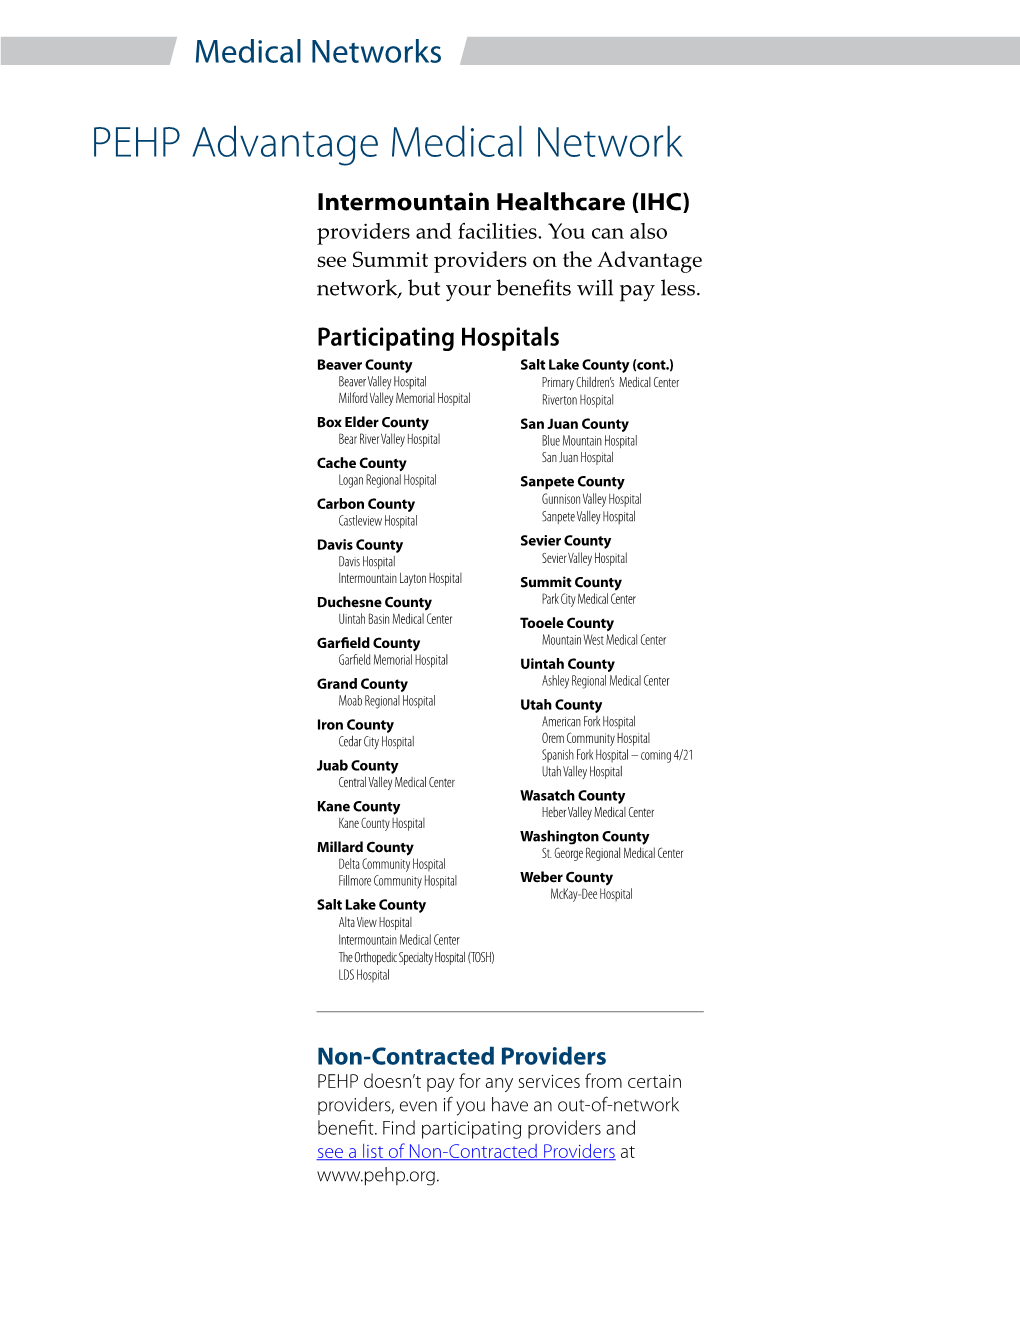 PEHP Advantage Medical Network Intermountain Healthcare (IHC) Providers and Facilities